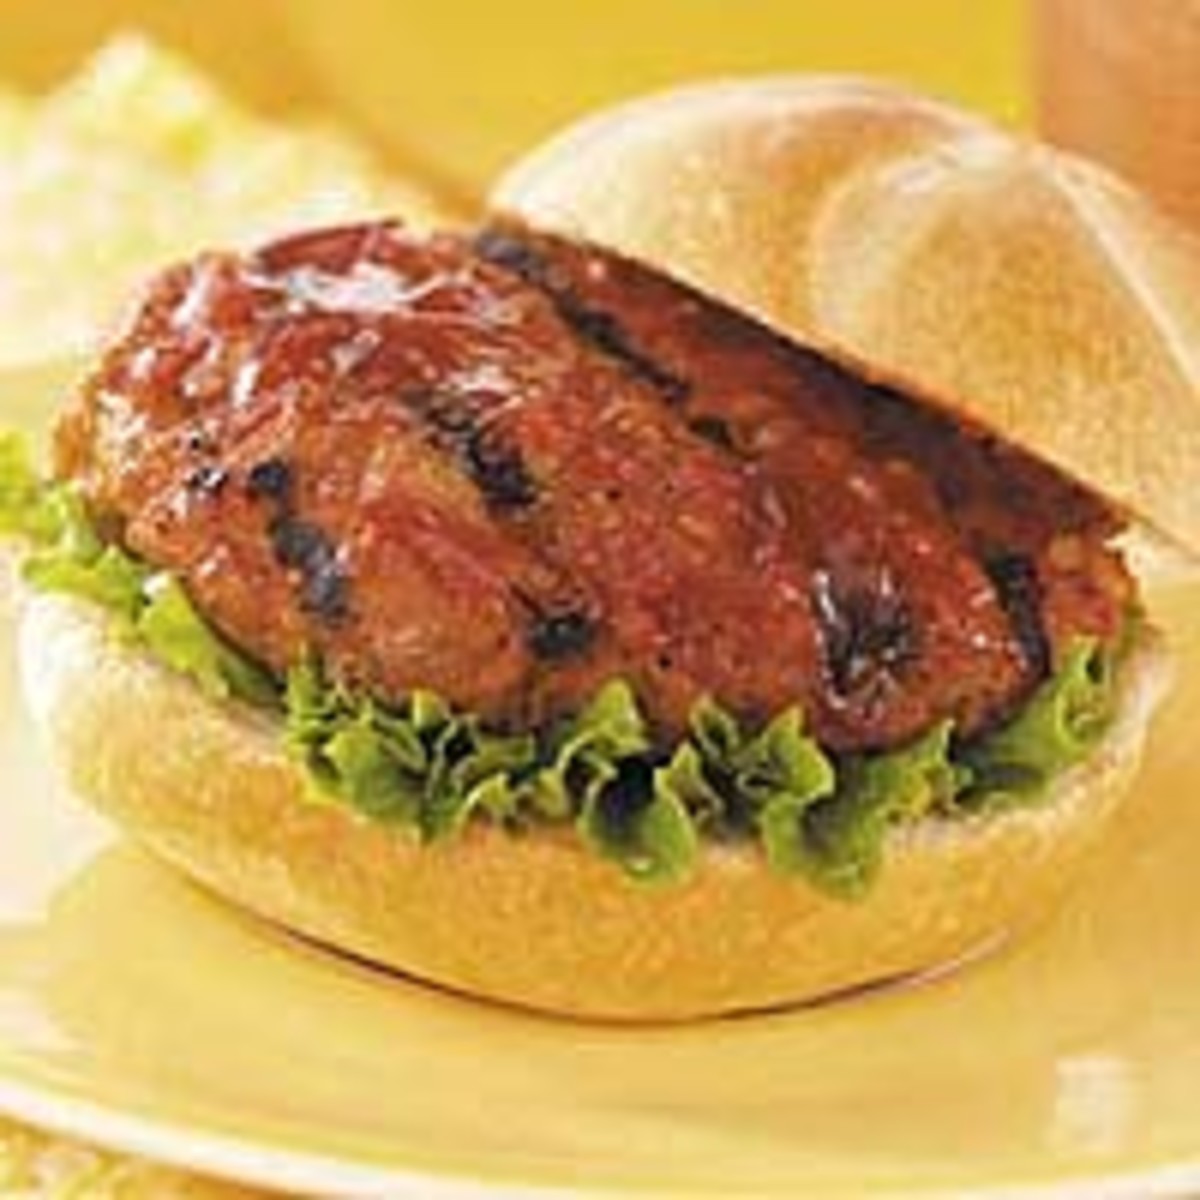 Grilled Turkey Burgers with Pepper Sauce